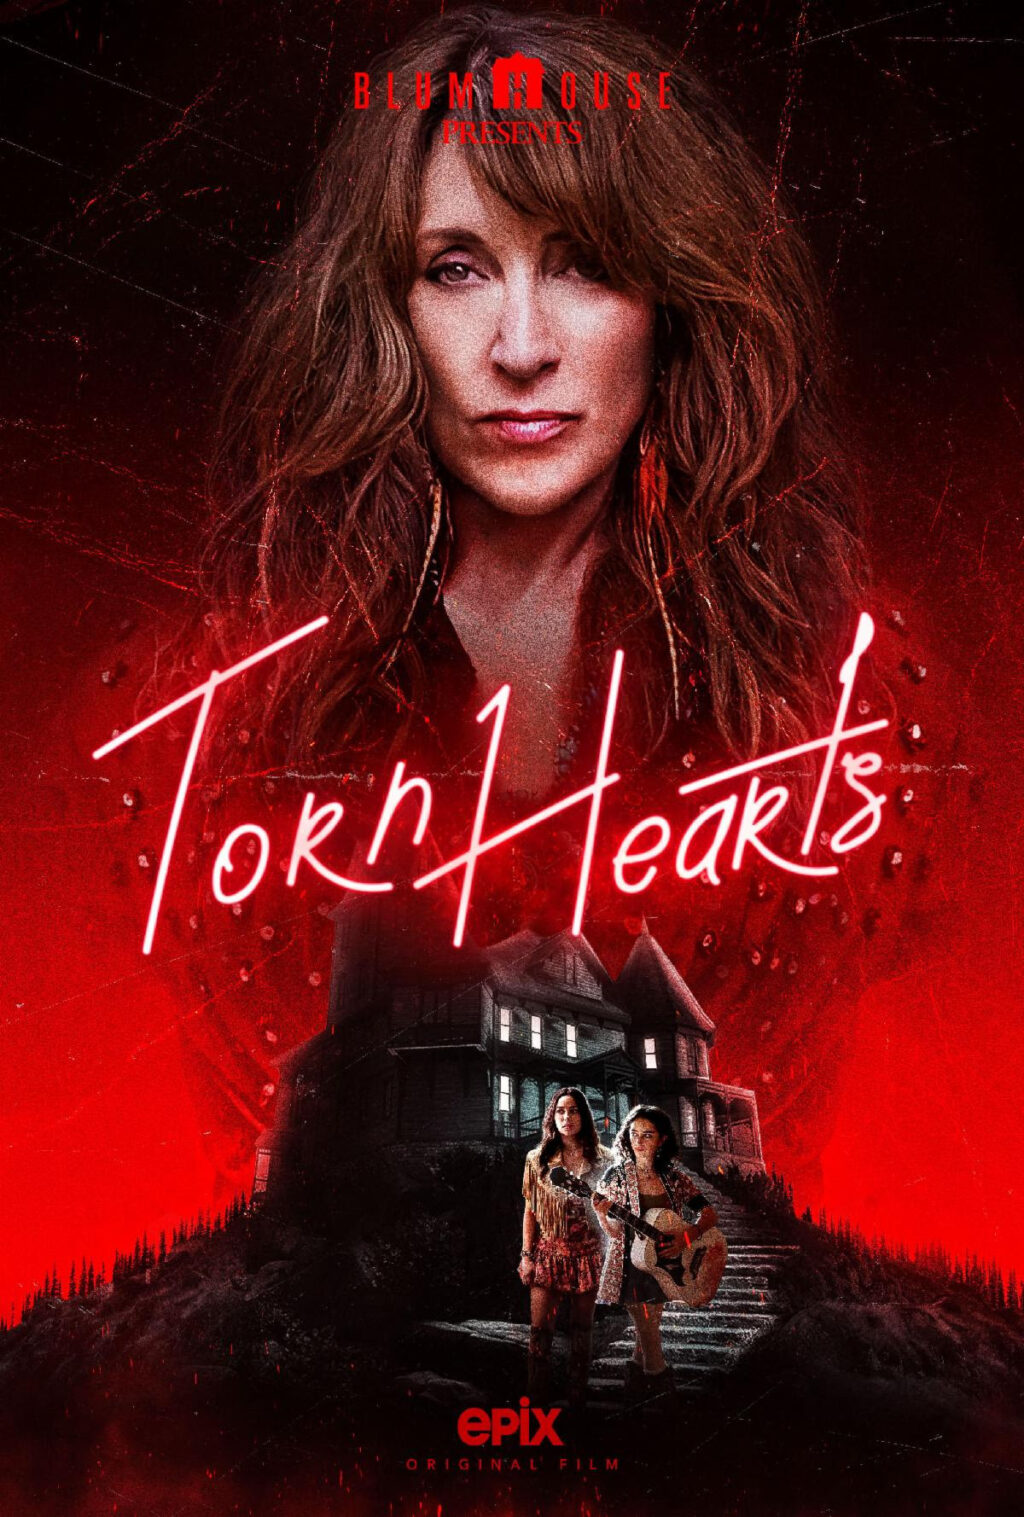 tornhearts 1024x1517 - 'Torn Hearts' Trailer: Country Music Gets Bloody In Brea Grant's New Film